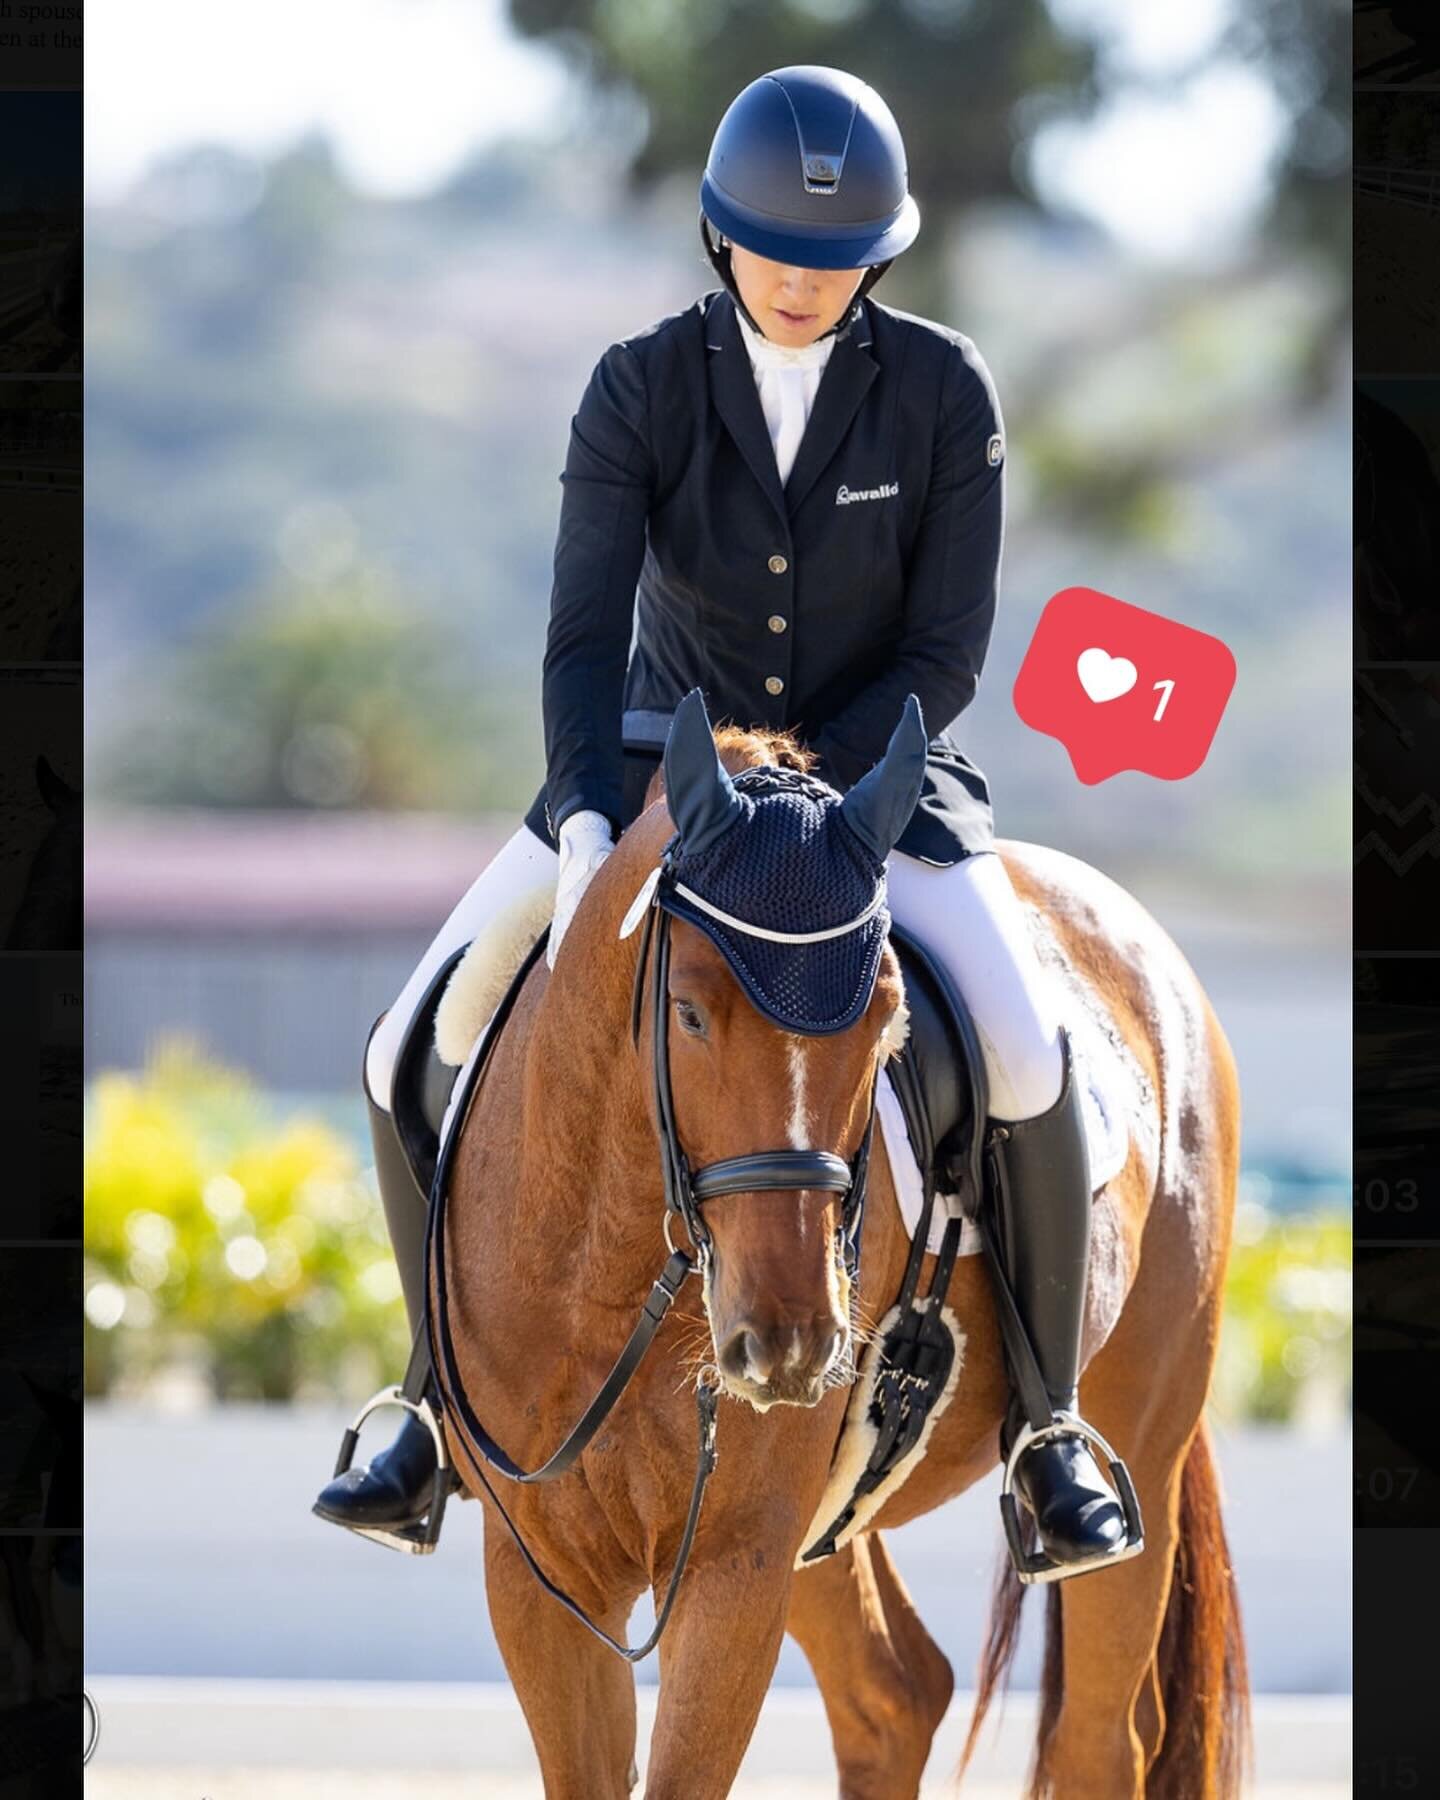 Happy Valentines Day! 
We are so lucky to have them 💕
.
.
.
. @arroyodelmar @cavalierecouture @trilogy_saddles